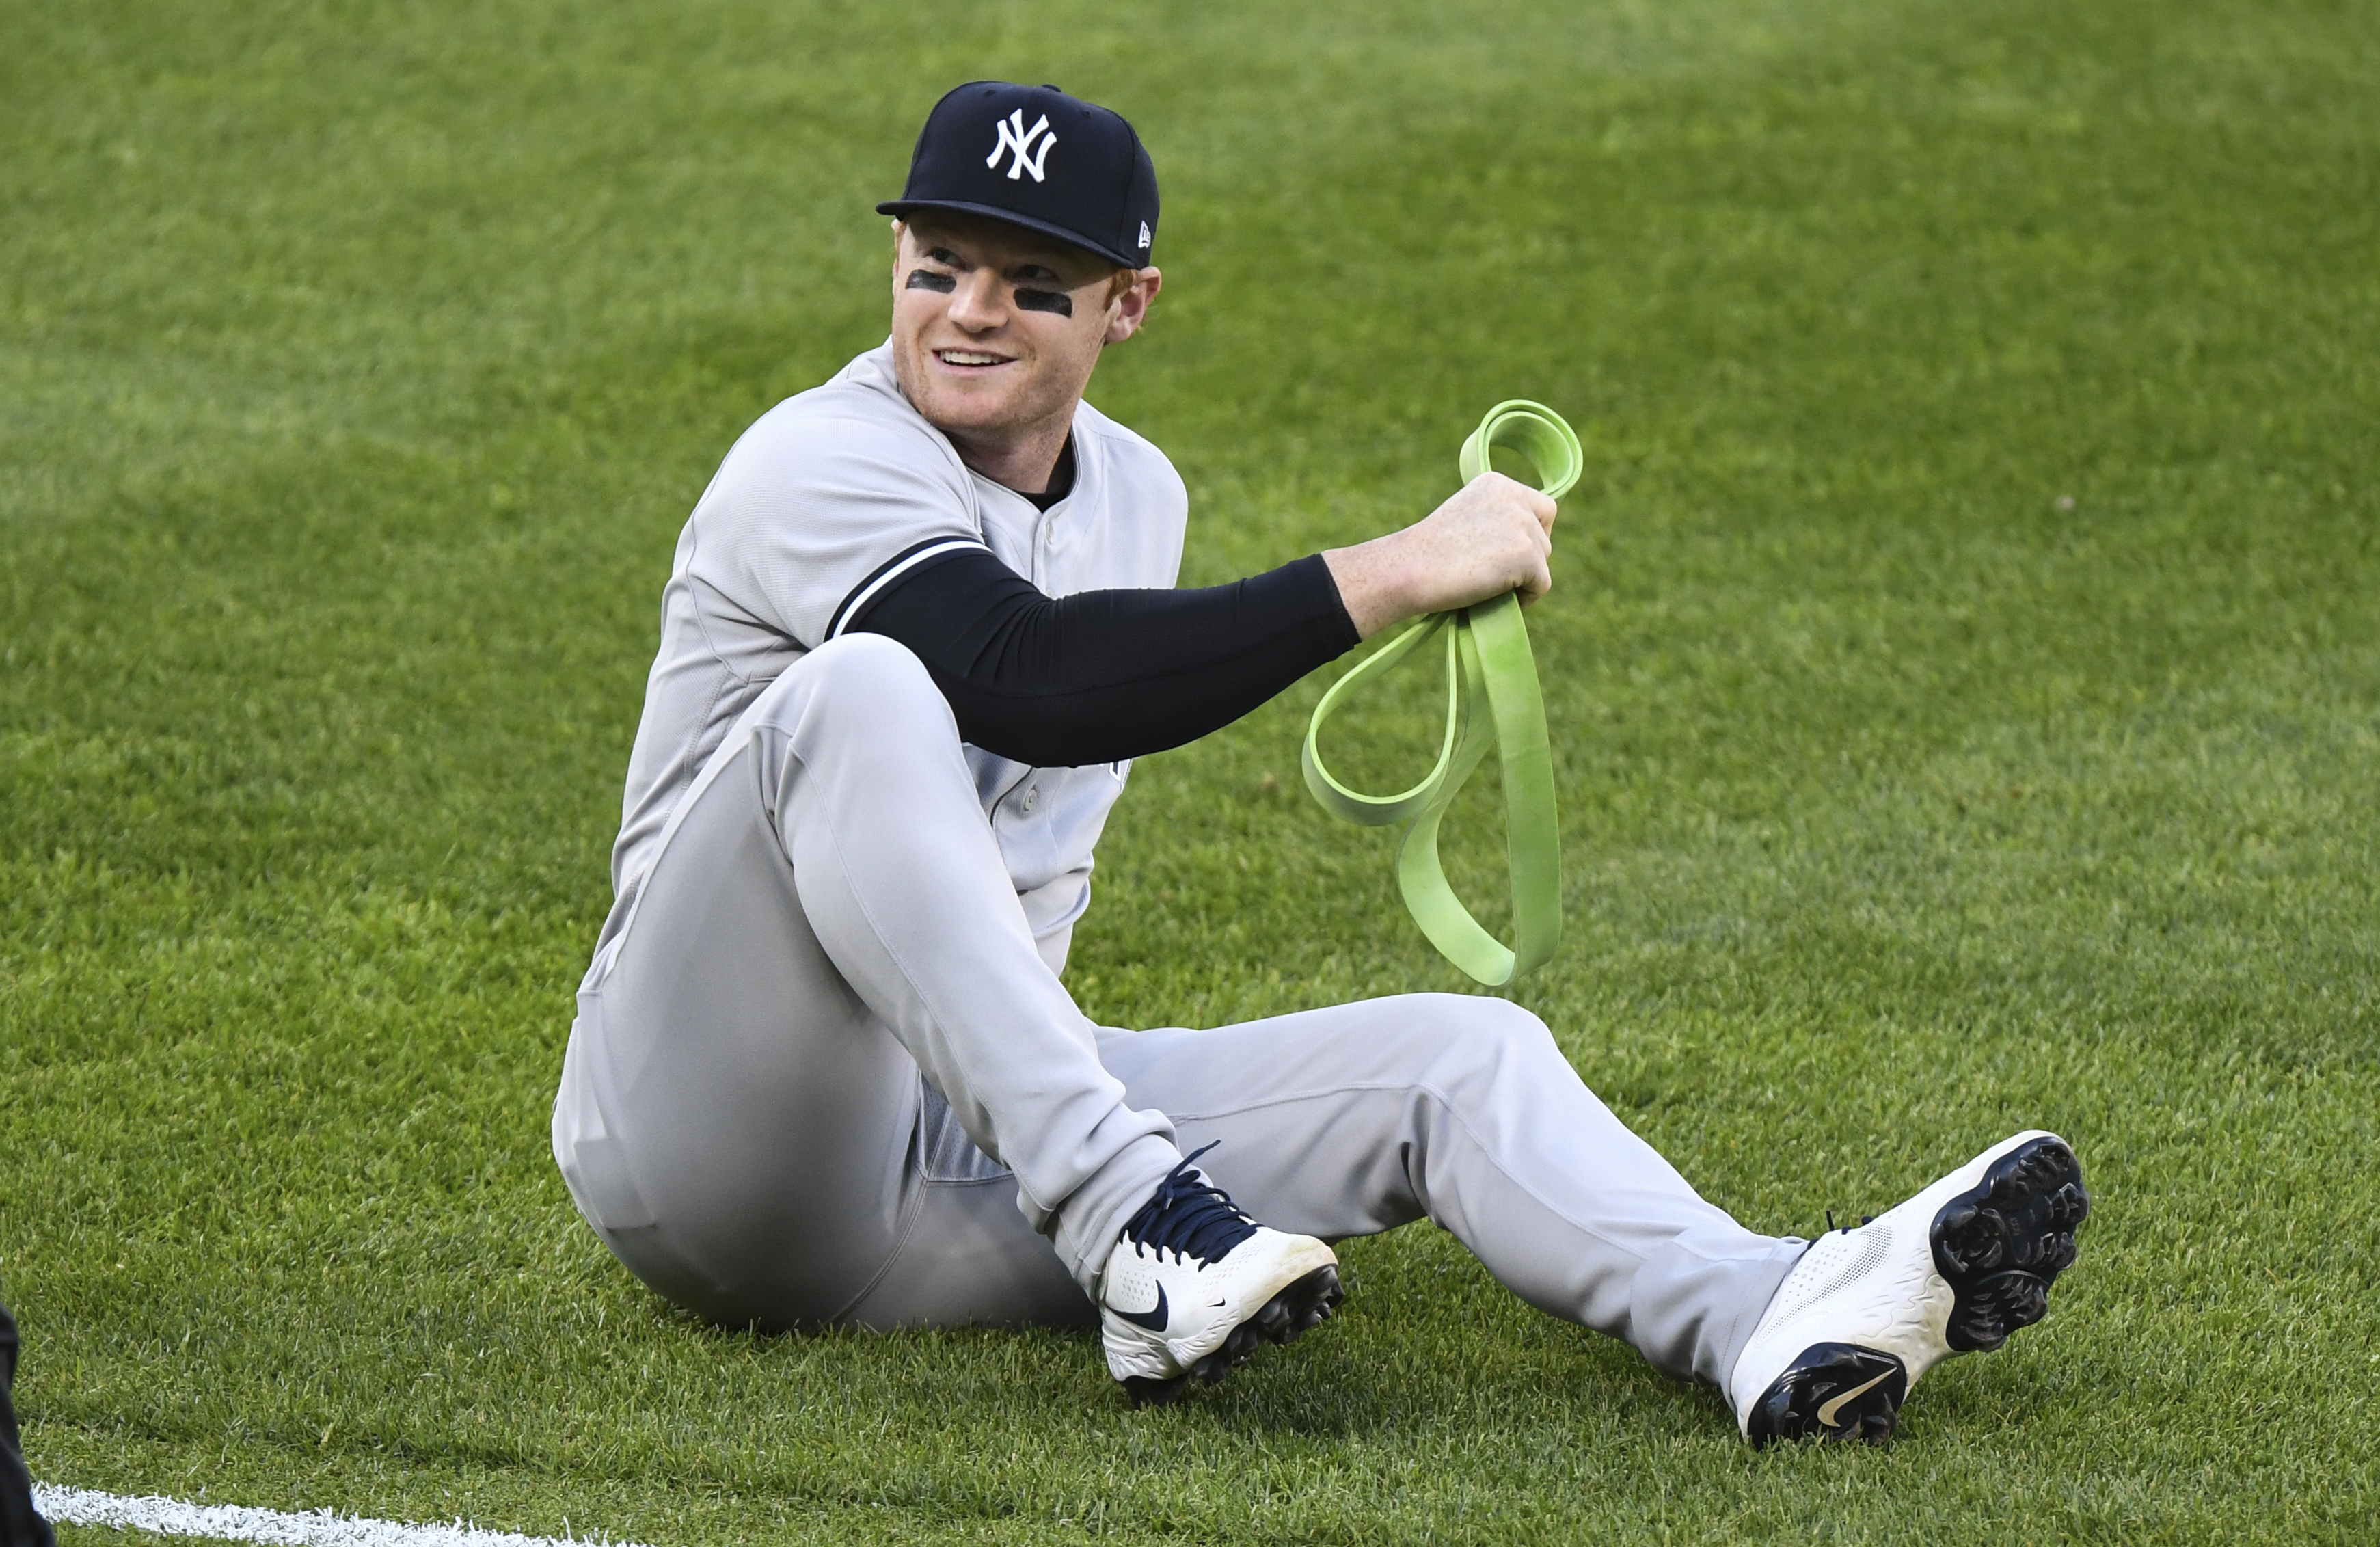 Clint Frazier's health issues continue